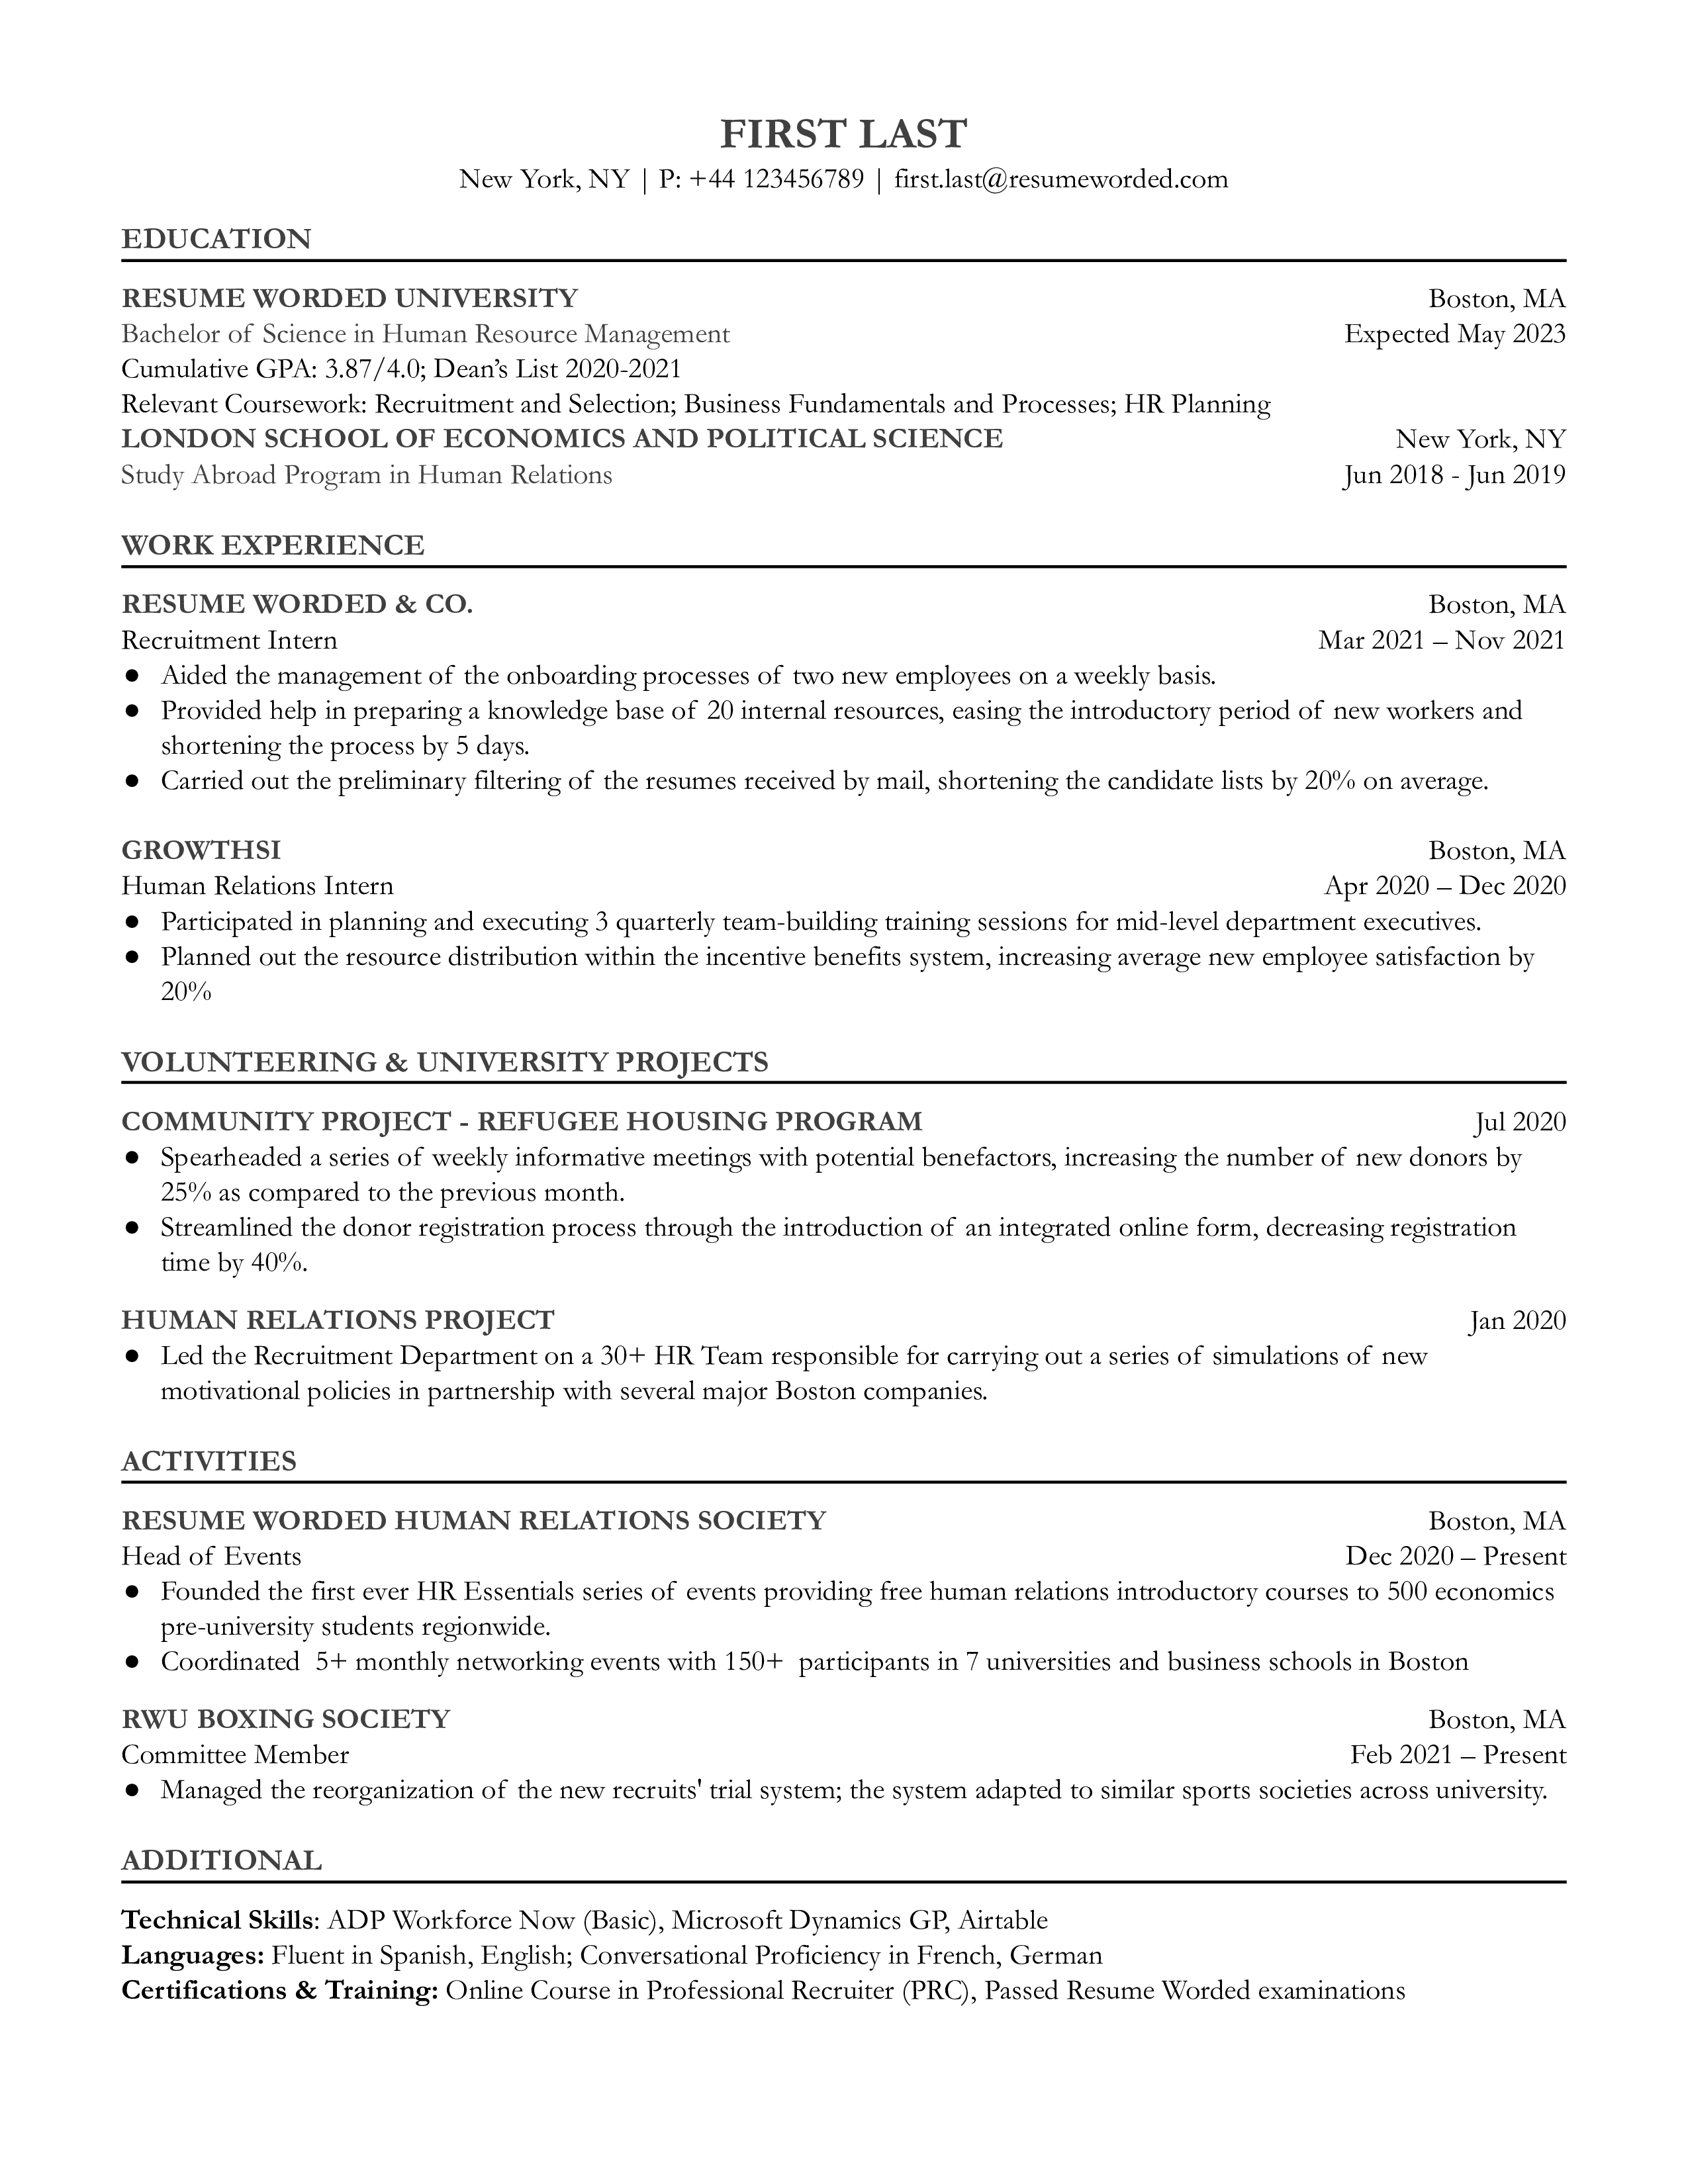 An entry-level recruiter resume highlighting relationship management and adaptability skills.